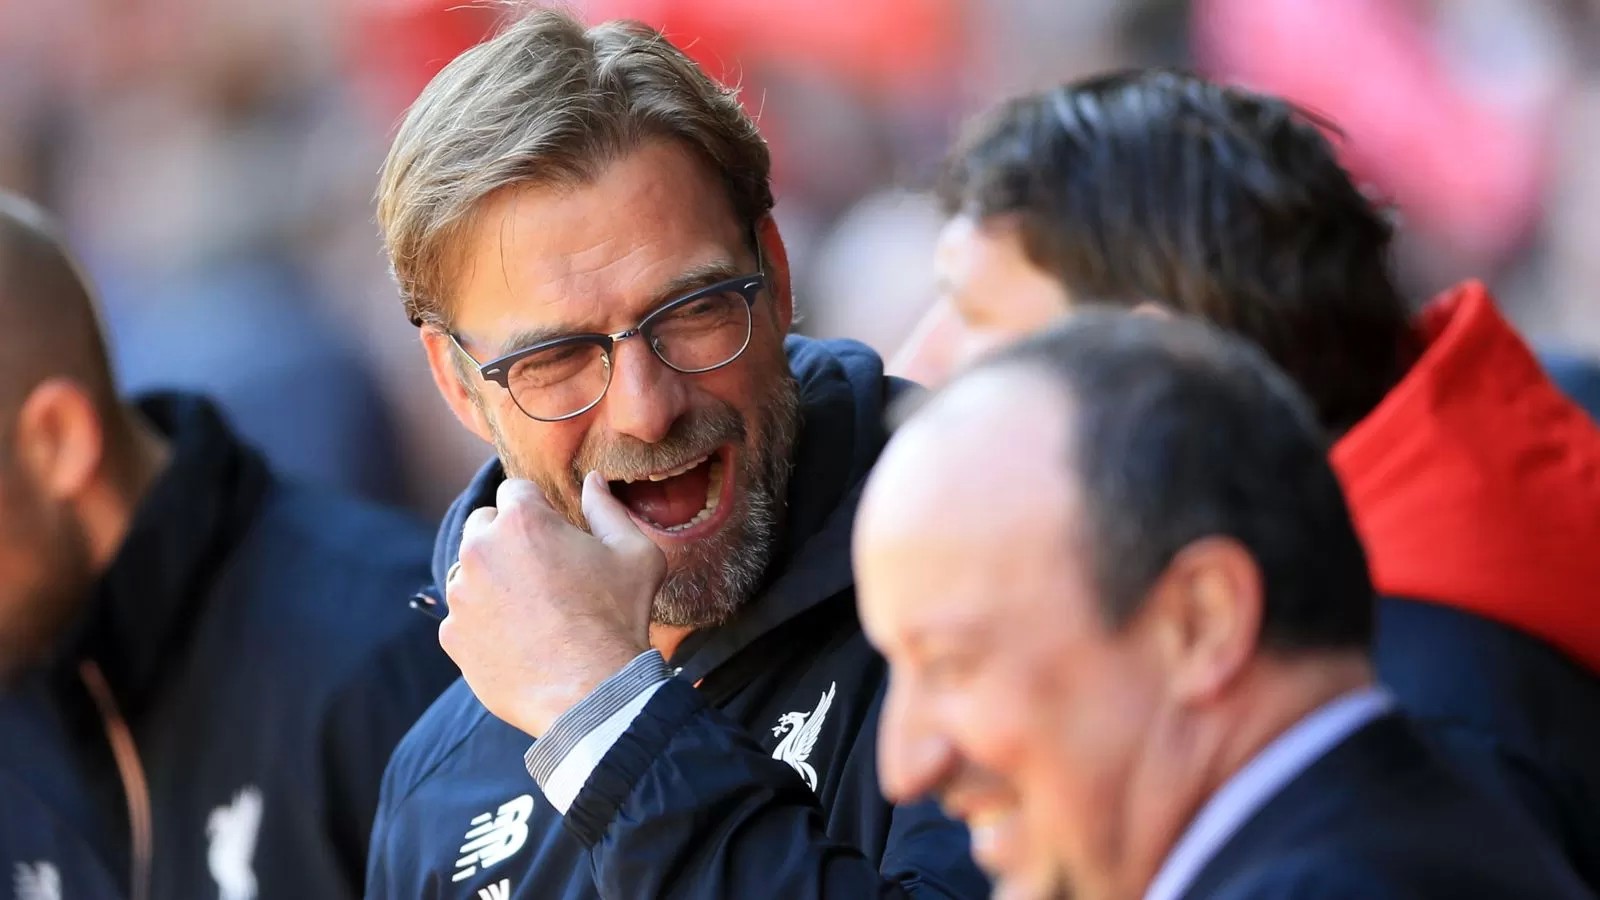 Benitez claims Klopp would be able to sign ‘nothing’ with his Liverpool budget in jealous rant